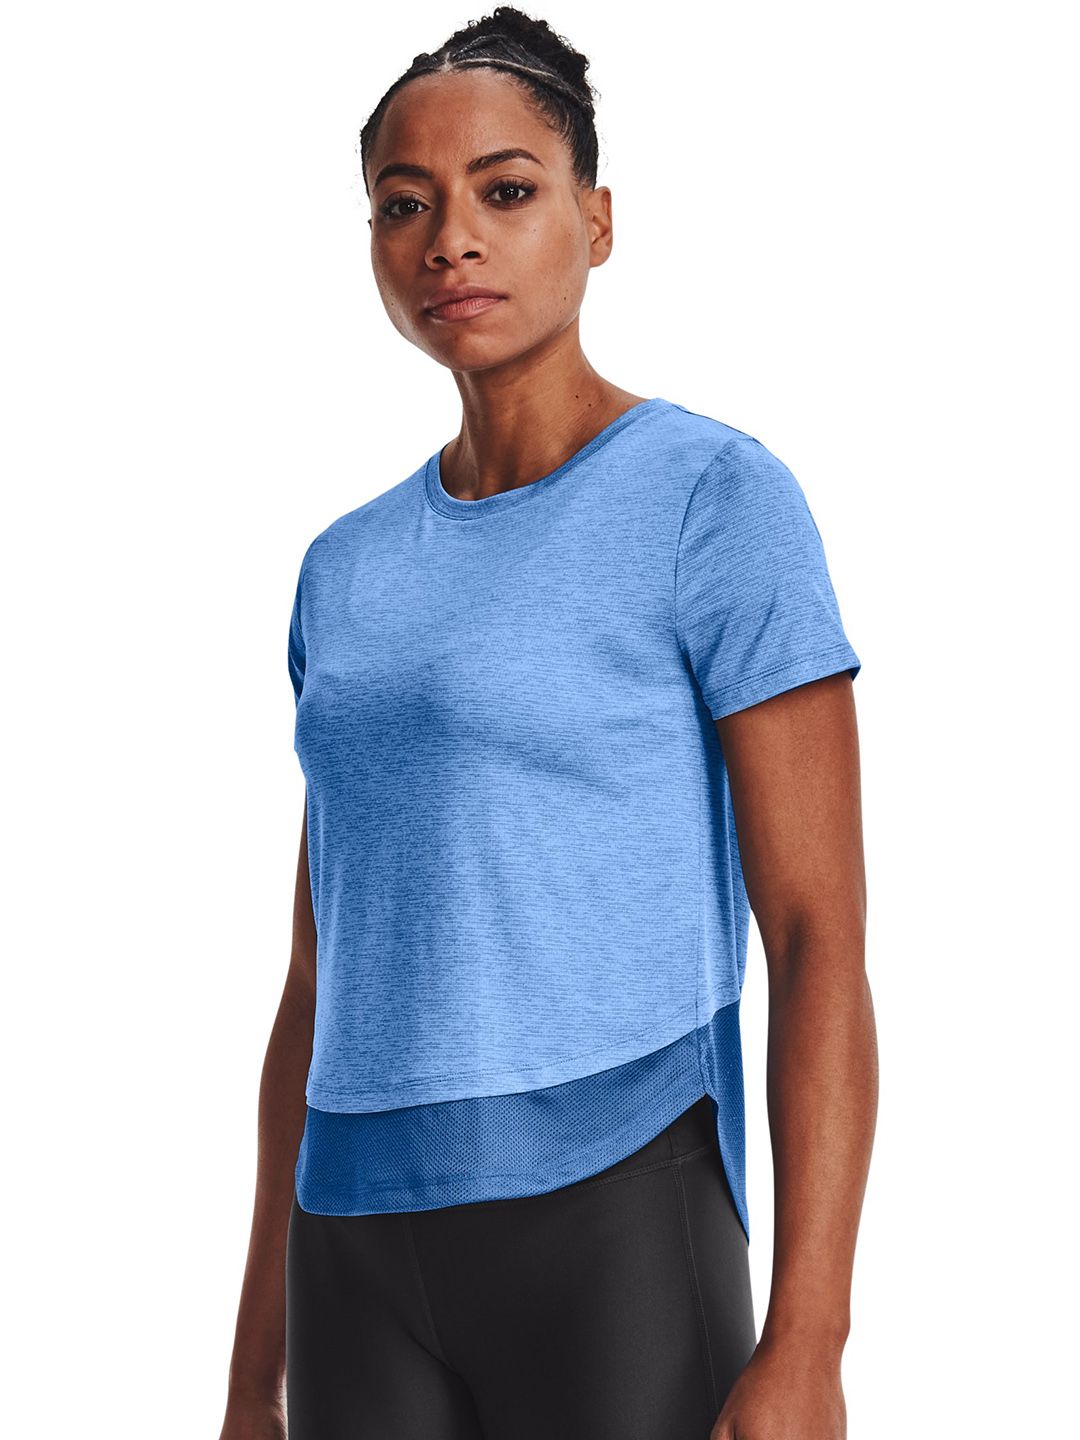 UNDER ARMOUR Women Blue Self Designed Loose Sports T-shirt Price in India